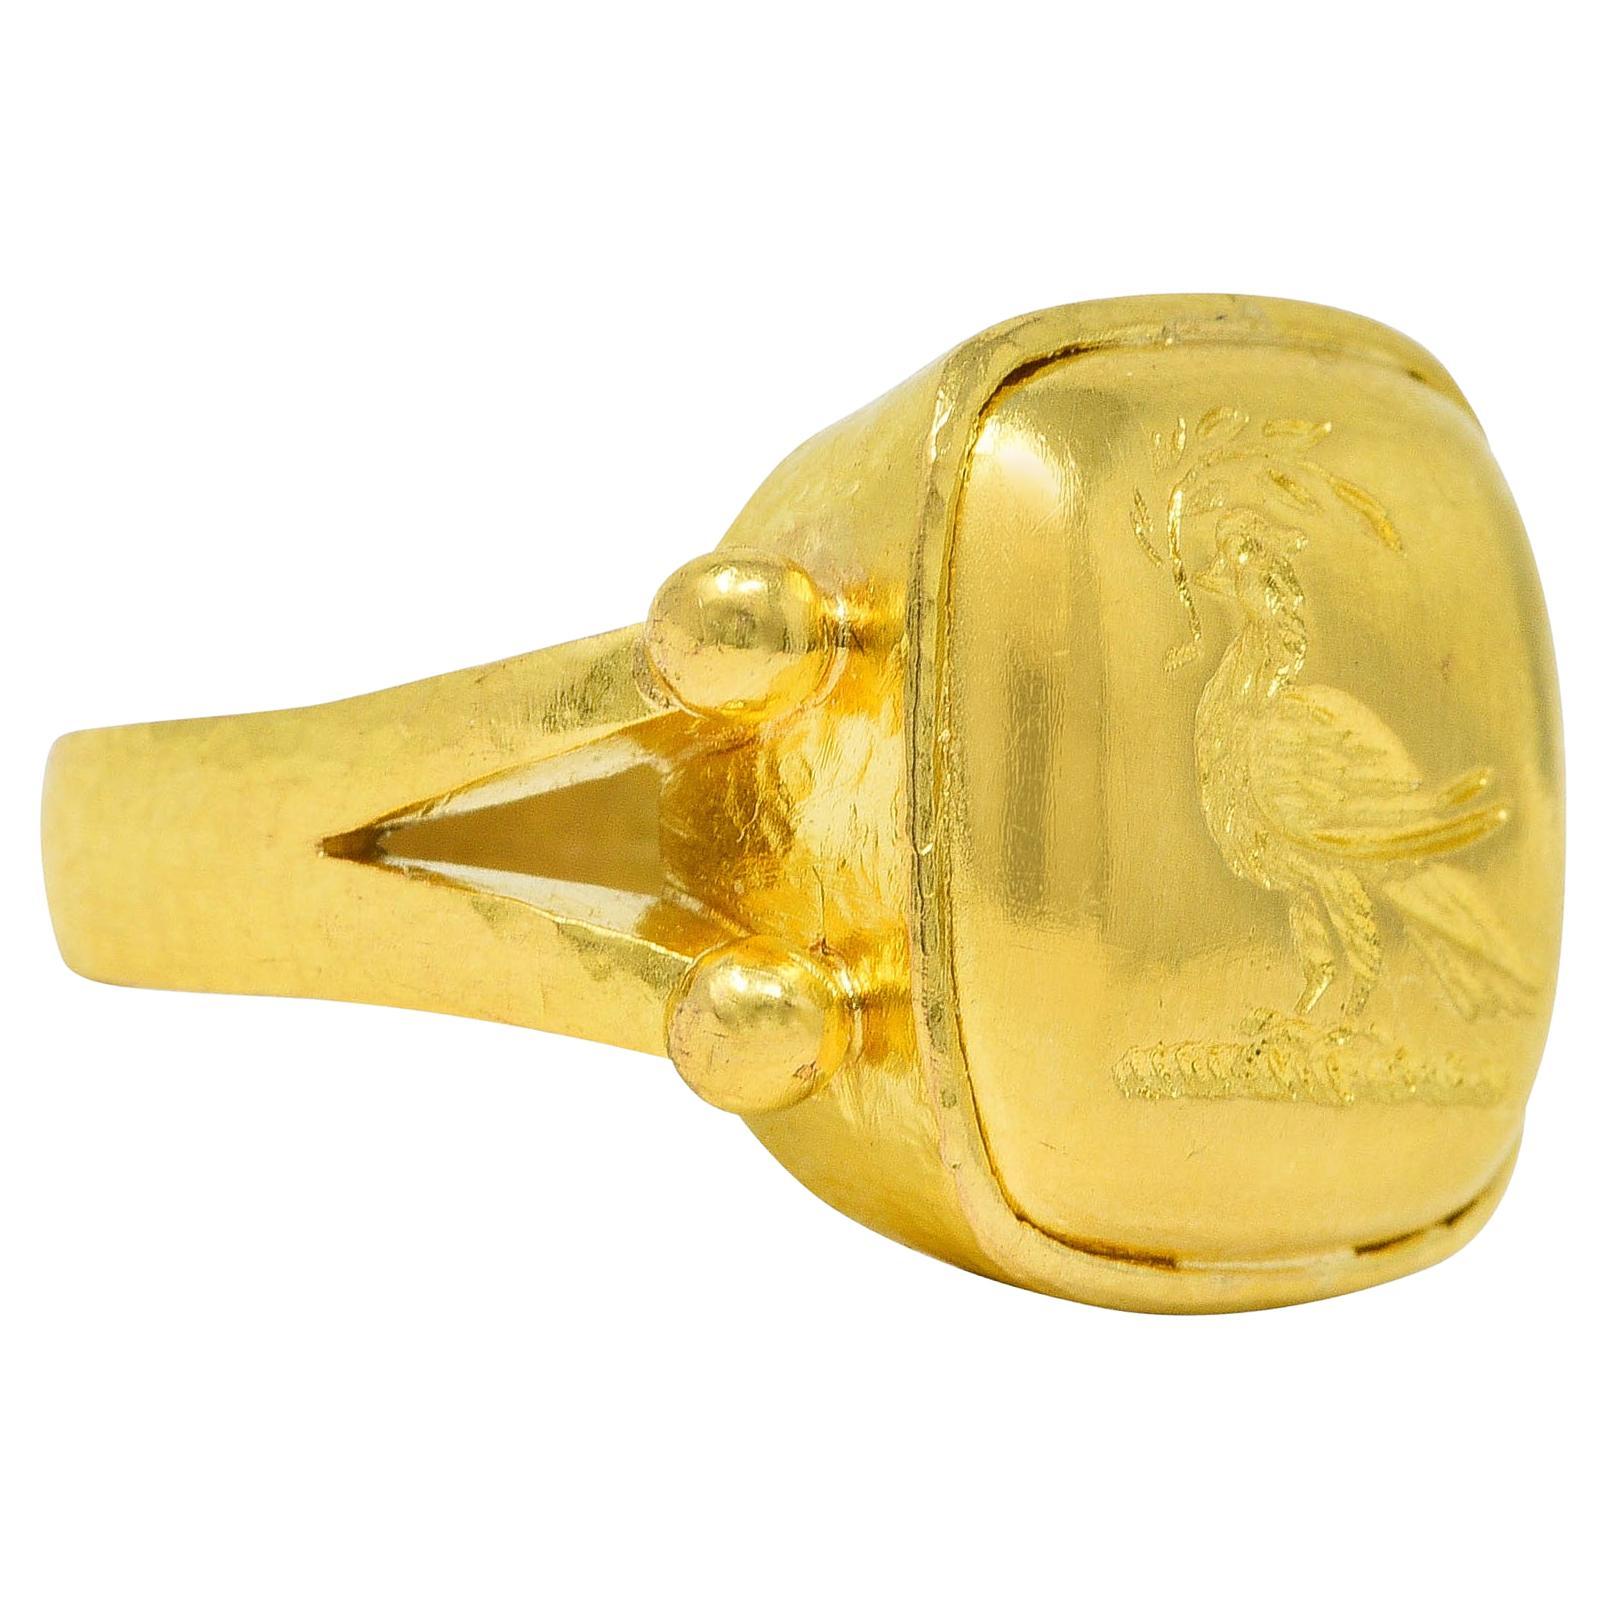 Ring centers a high polished gold cushion shaped intaglio

Depicting a pheasant holding an olive branch in its beak

Flanked by split shoulders with gold beading

With hammered gold texture throughout

Stamped 19k for 19 karat gold

With maker's